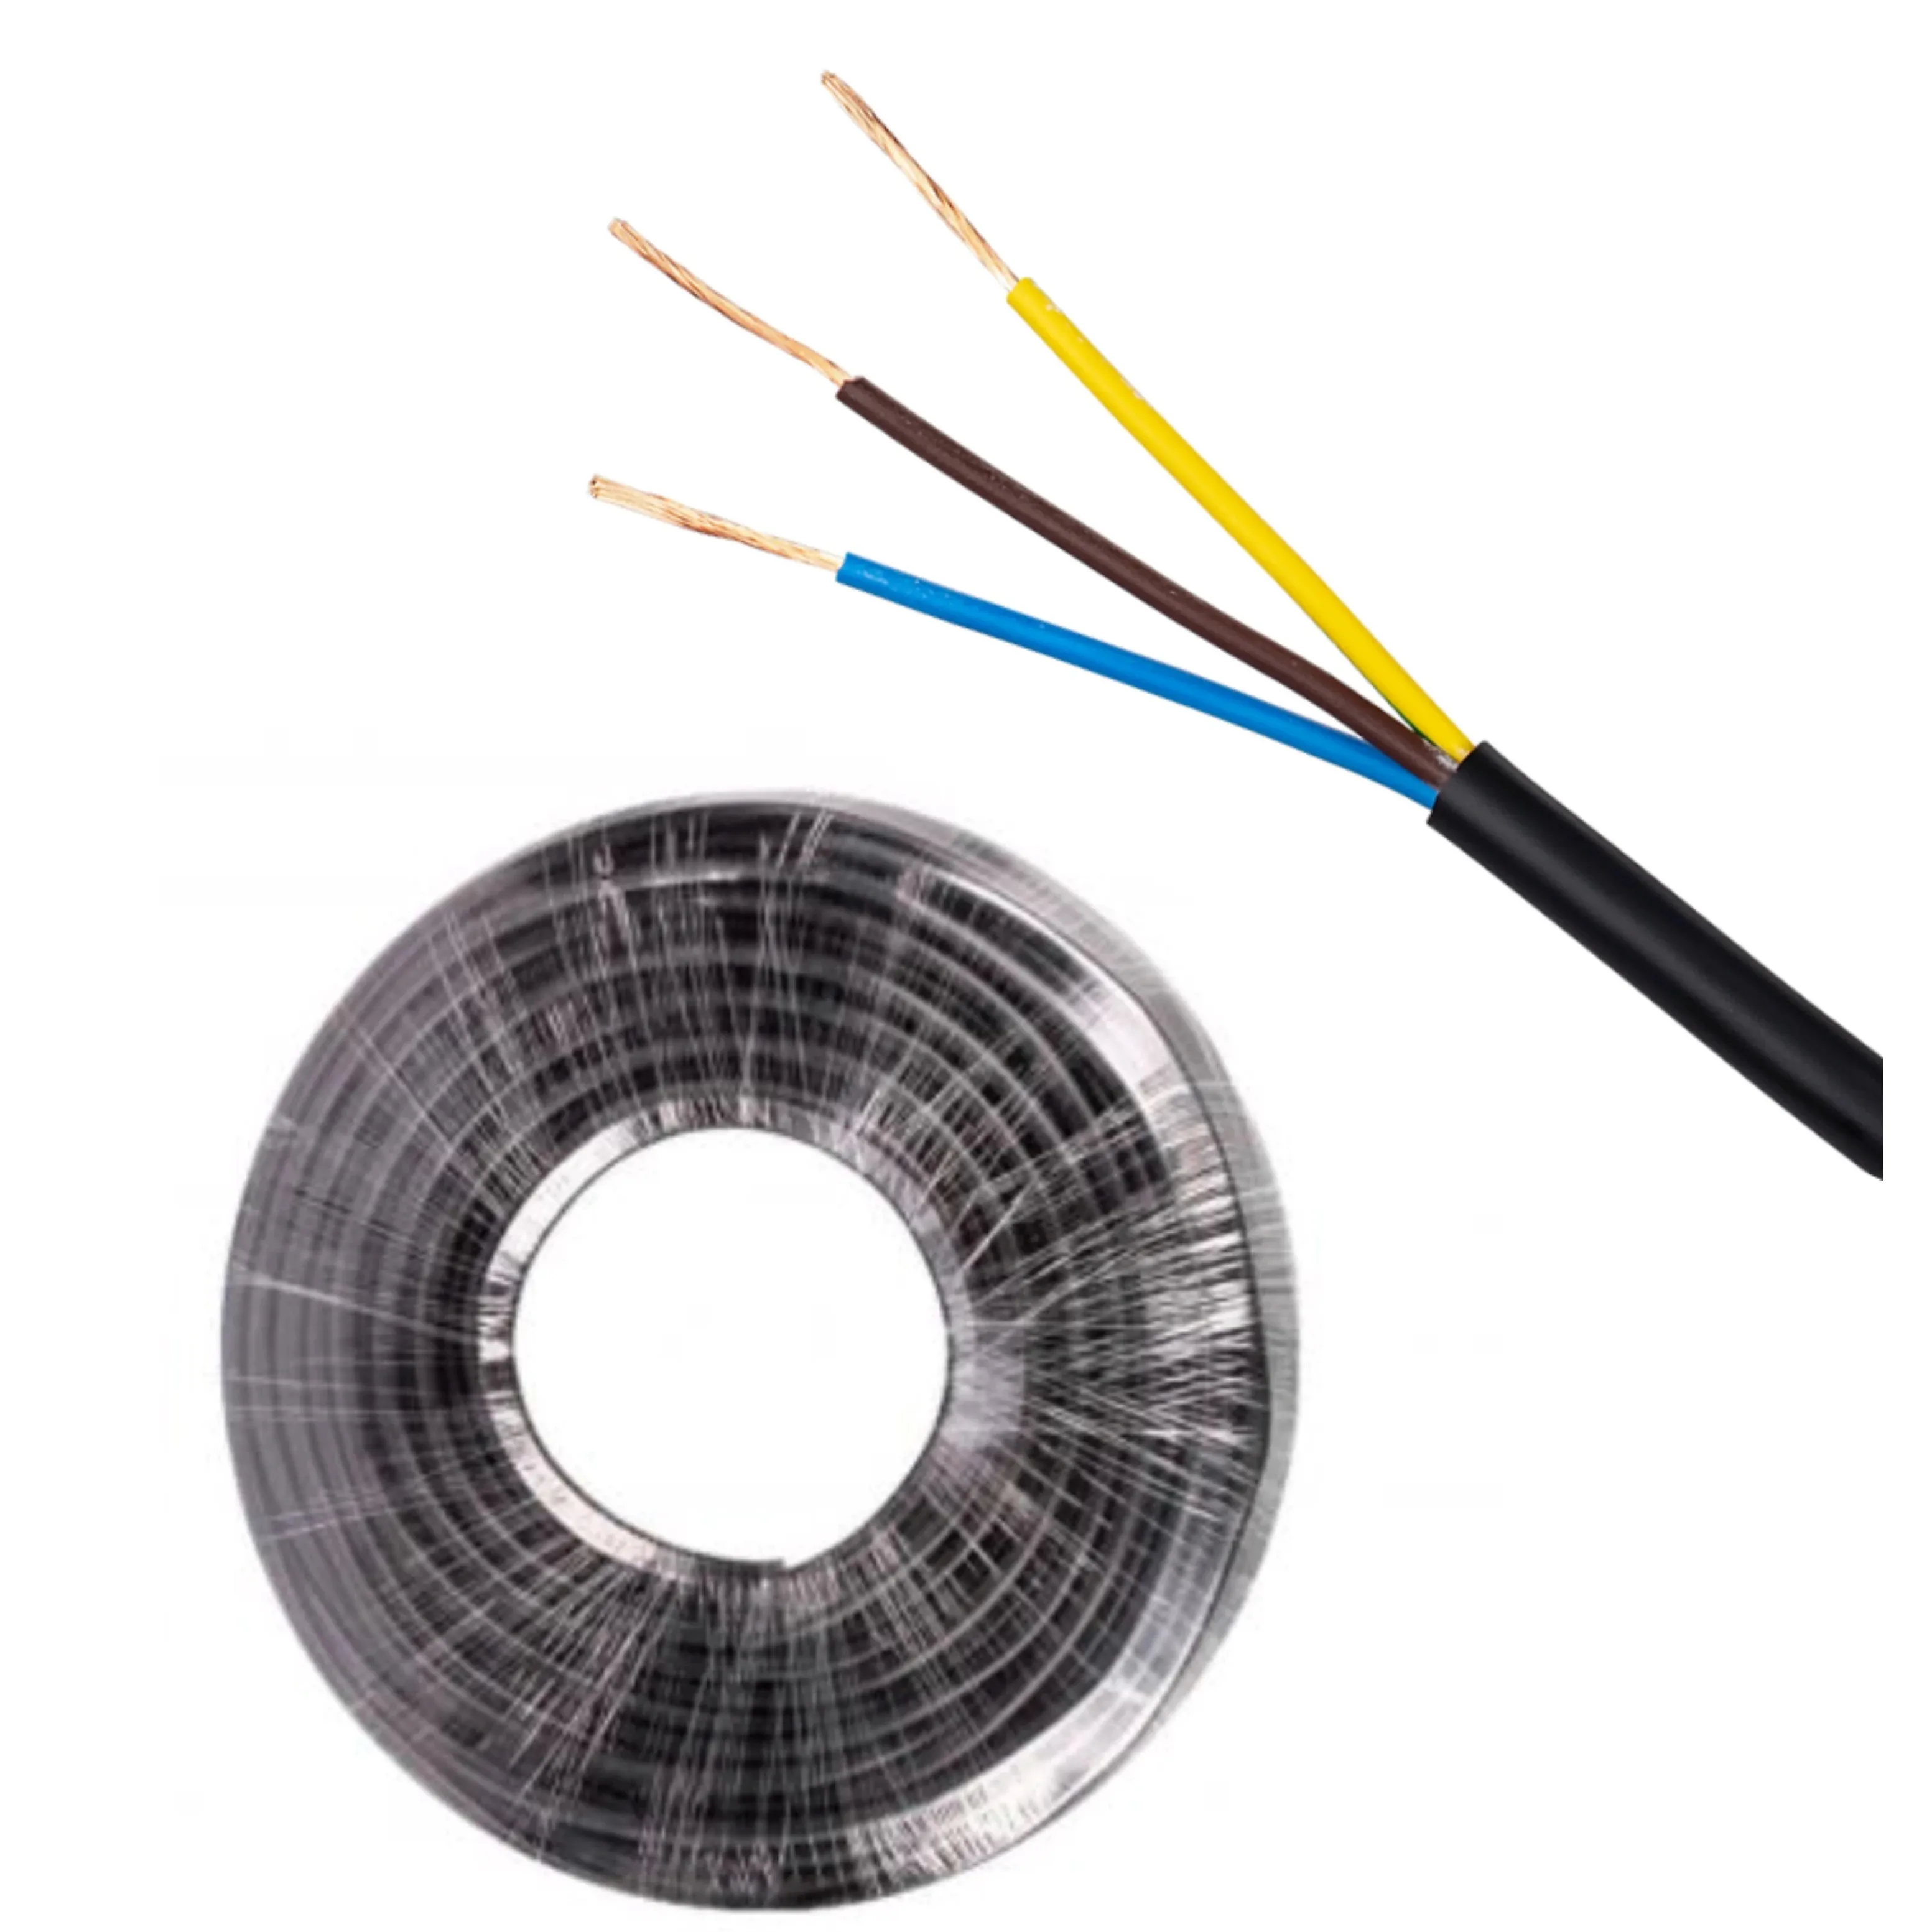 PVC 300 500v en50525 vde h05vv f cable 3 core flexible 0.75mm 1mm 1.5mm rvv electrical wire